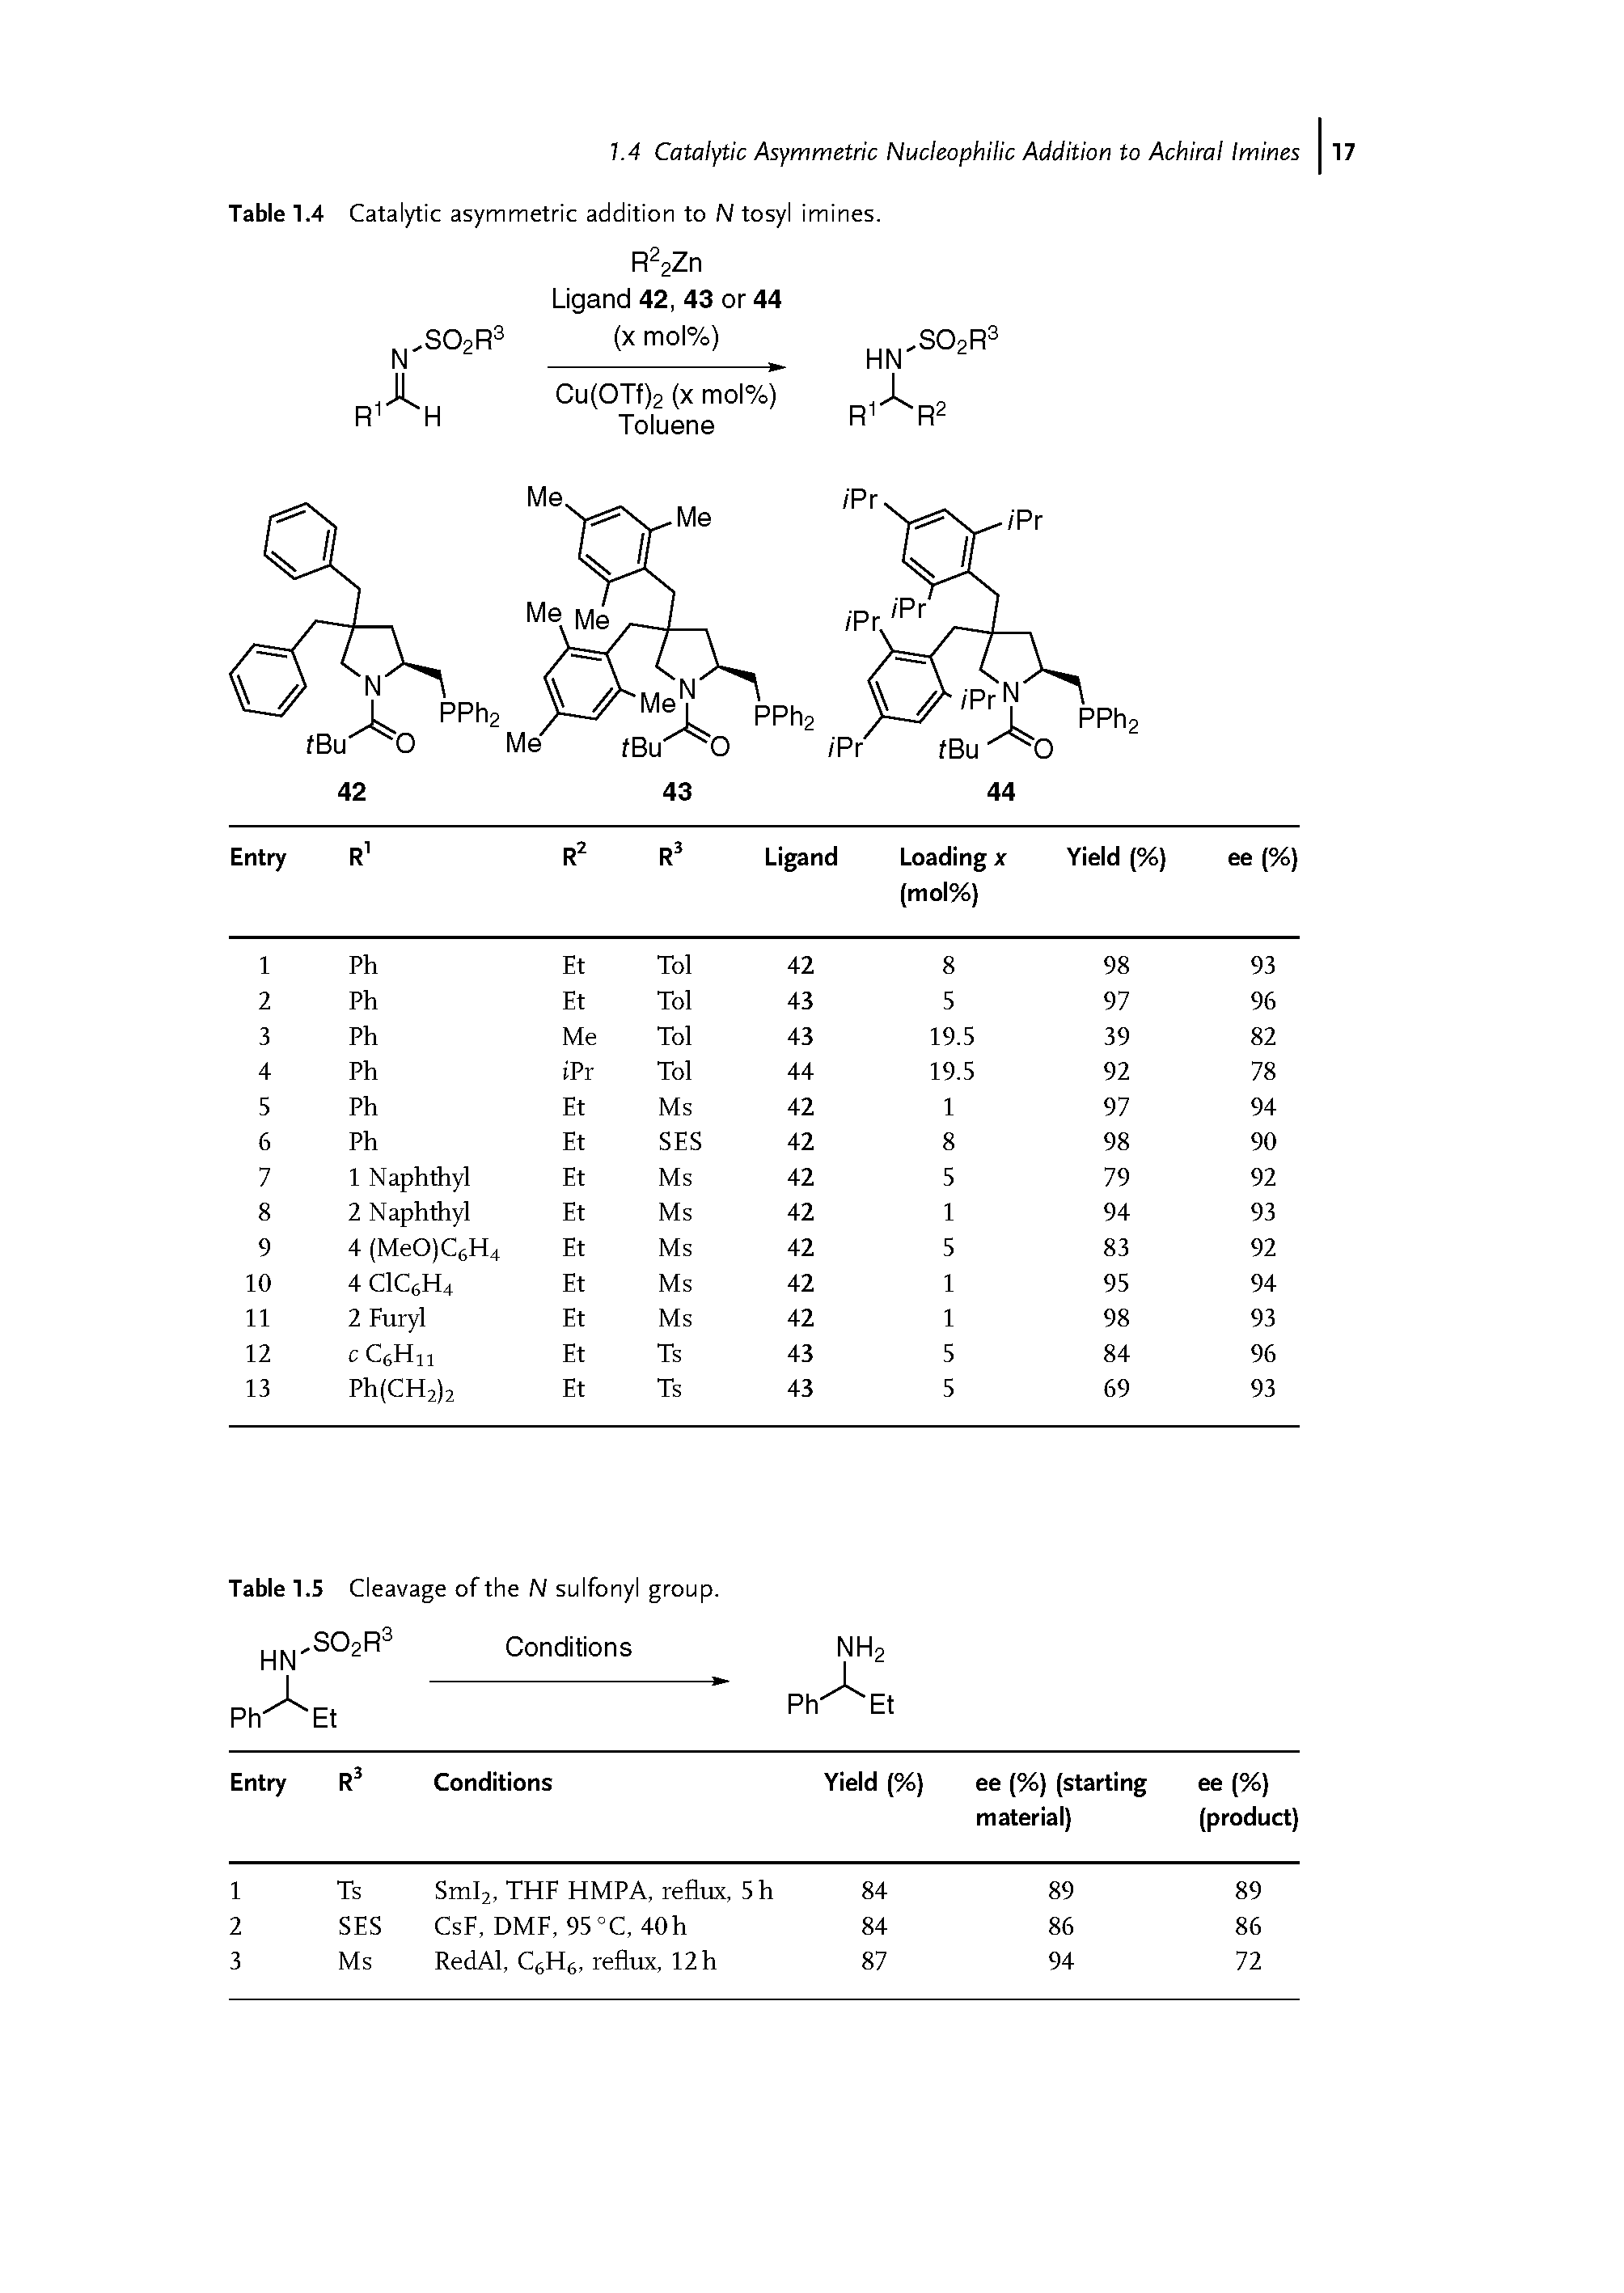 Table 1.4 Catalytic asymmetric addition to N tosyl imines R sZn...